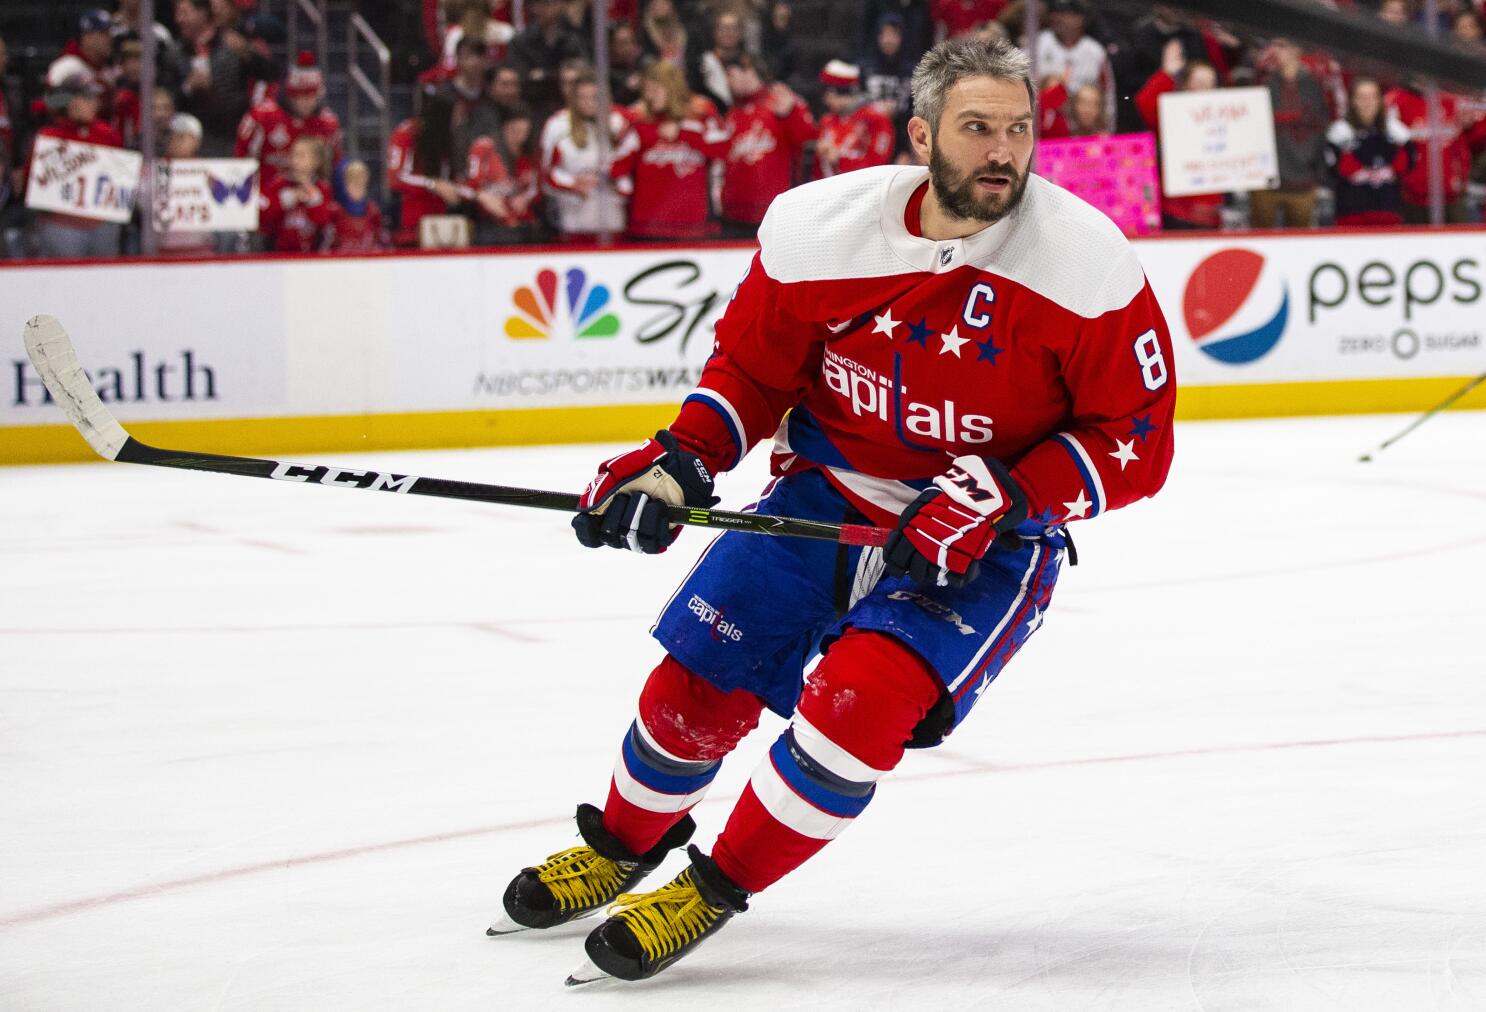 Download Washington Capitals stars Vrana and Ovechkin in action